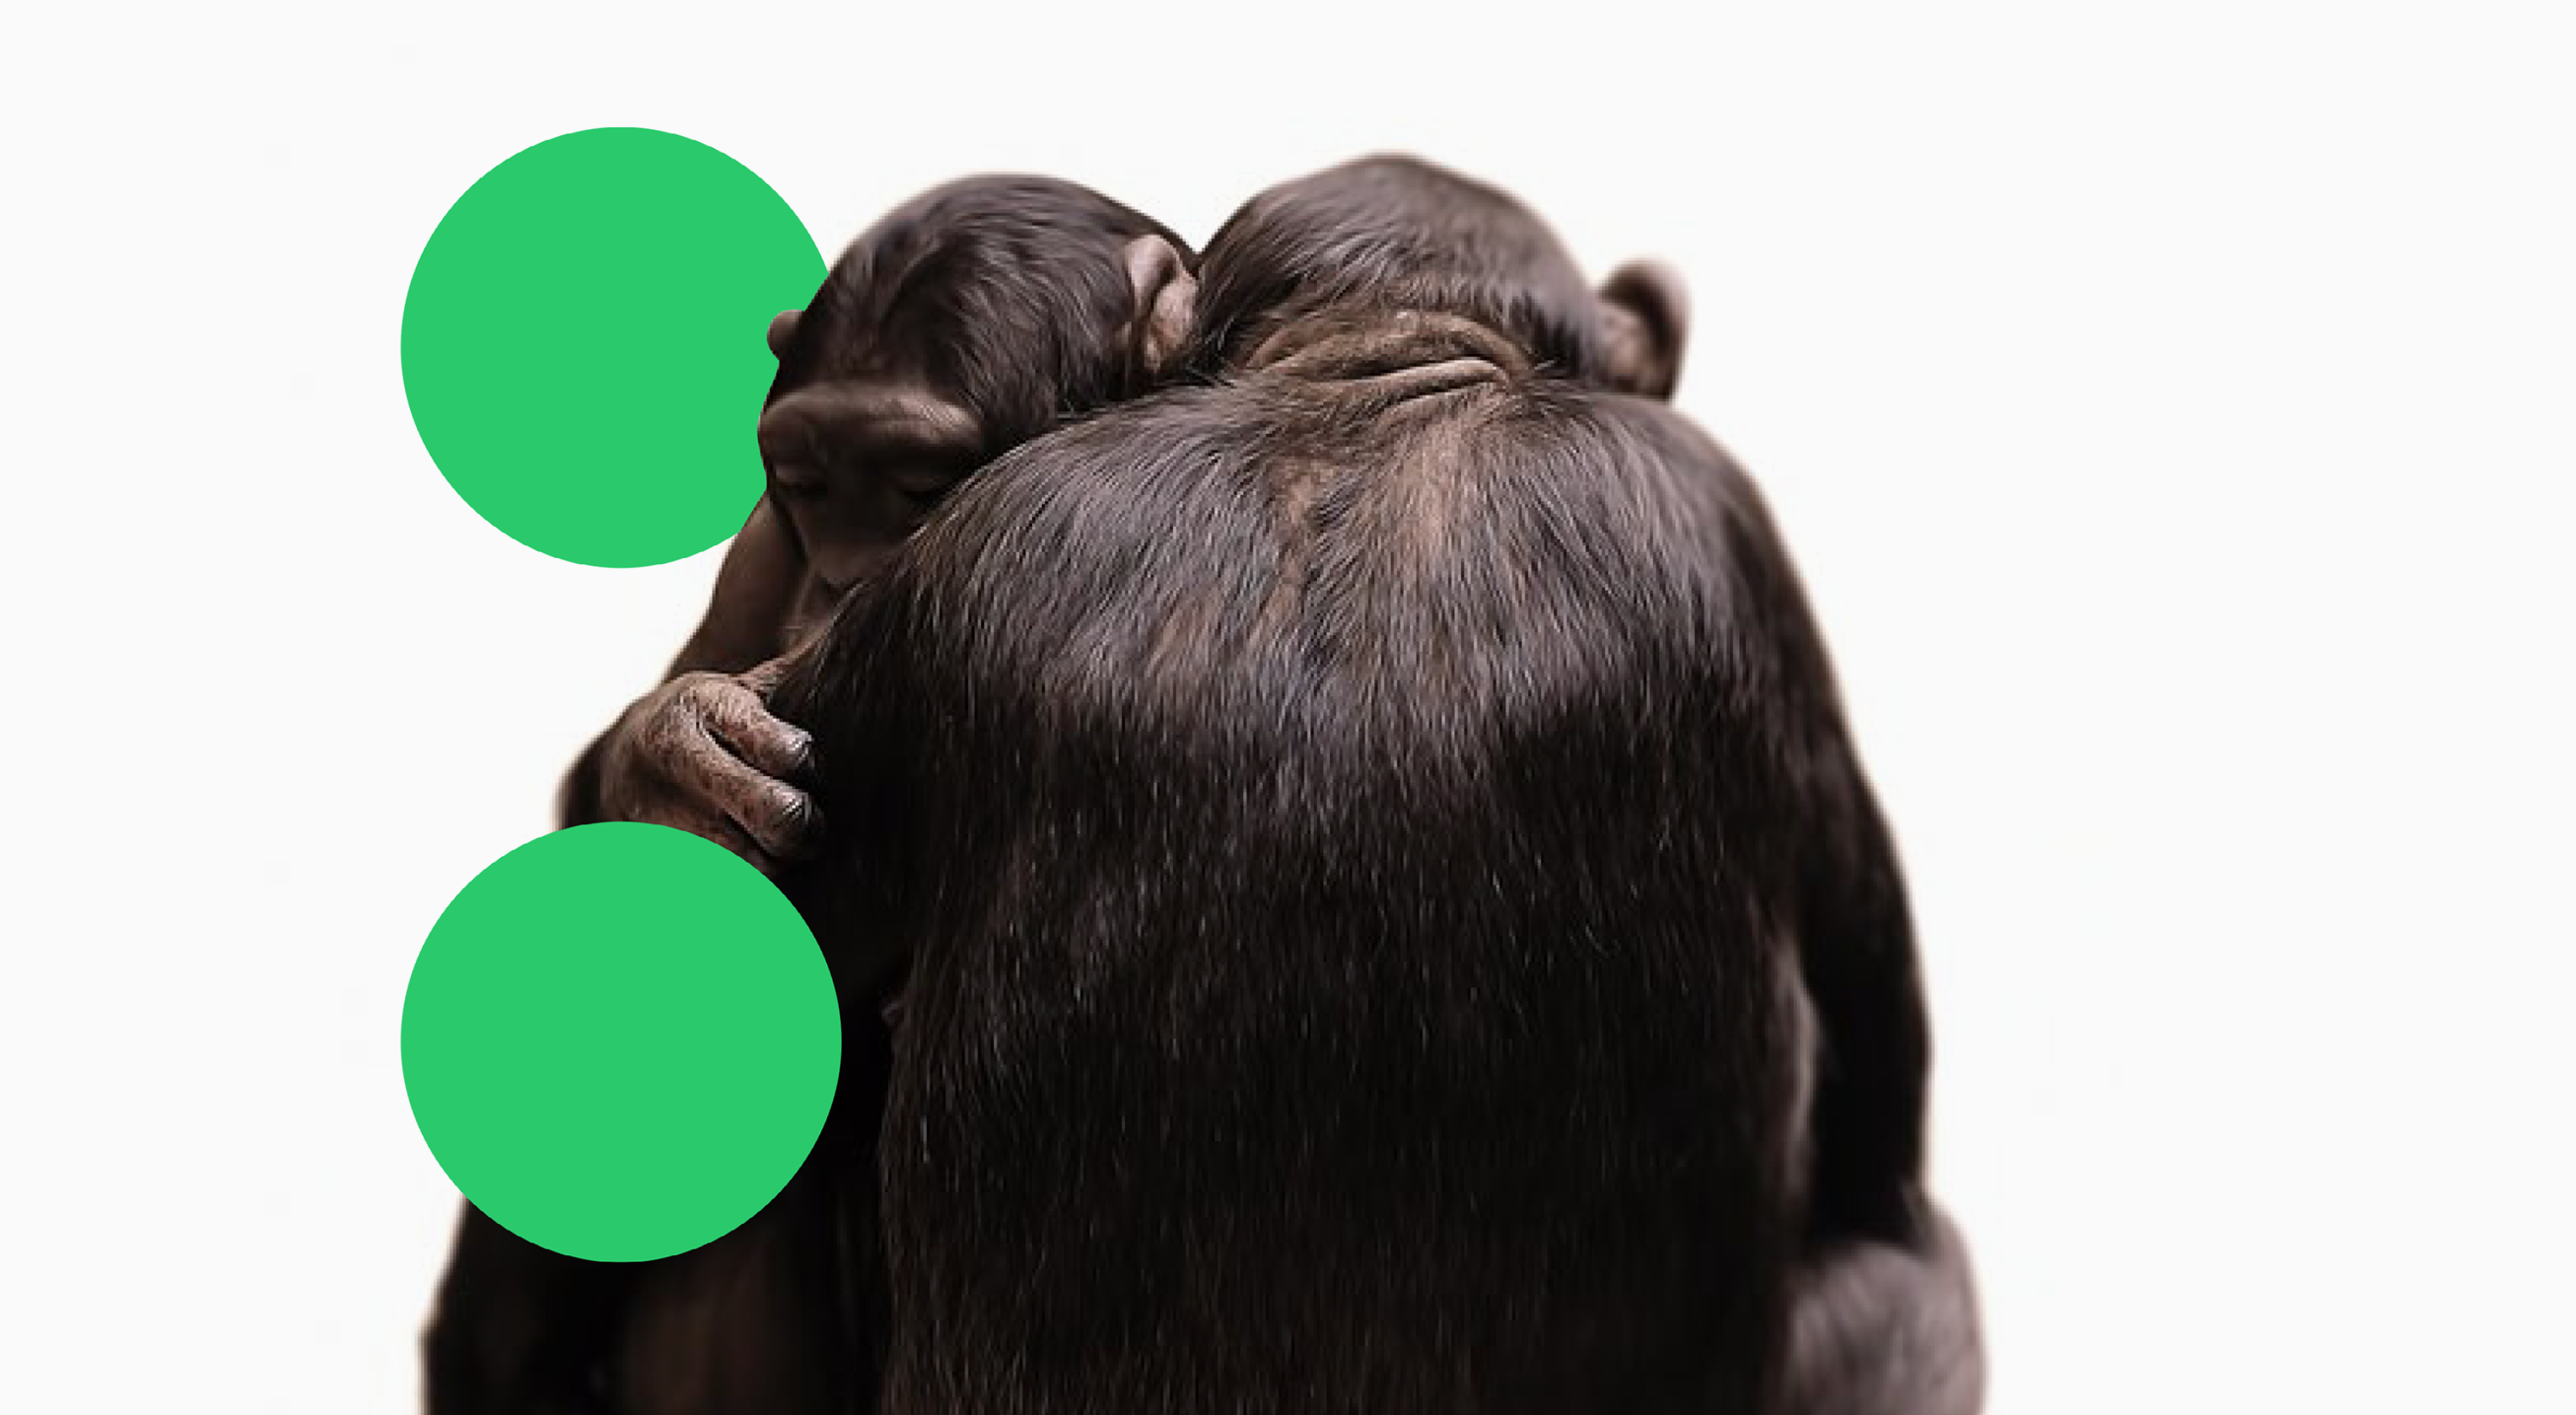 Two chimpanzees hugging with green dots superimposed